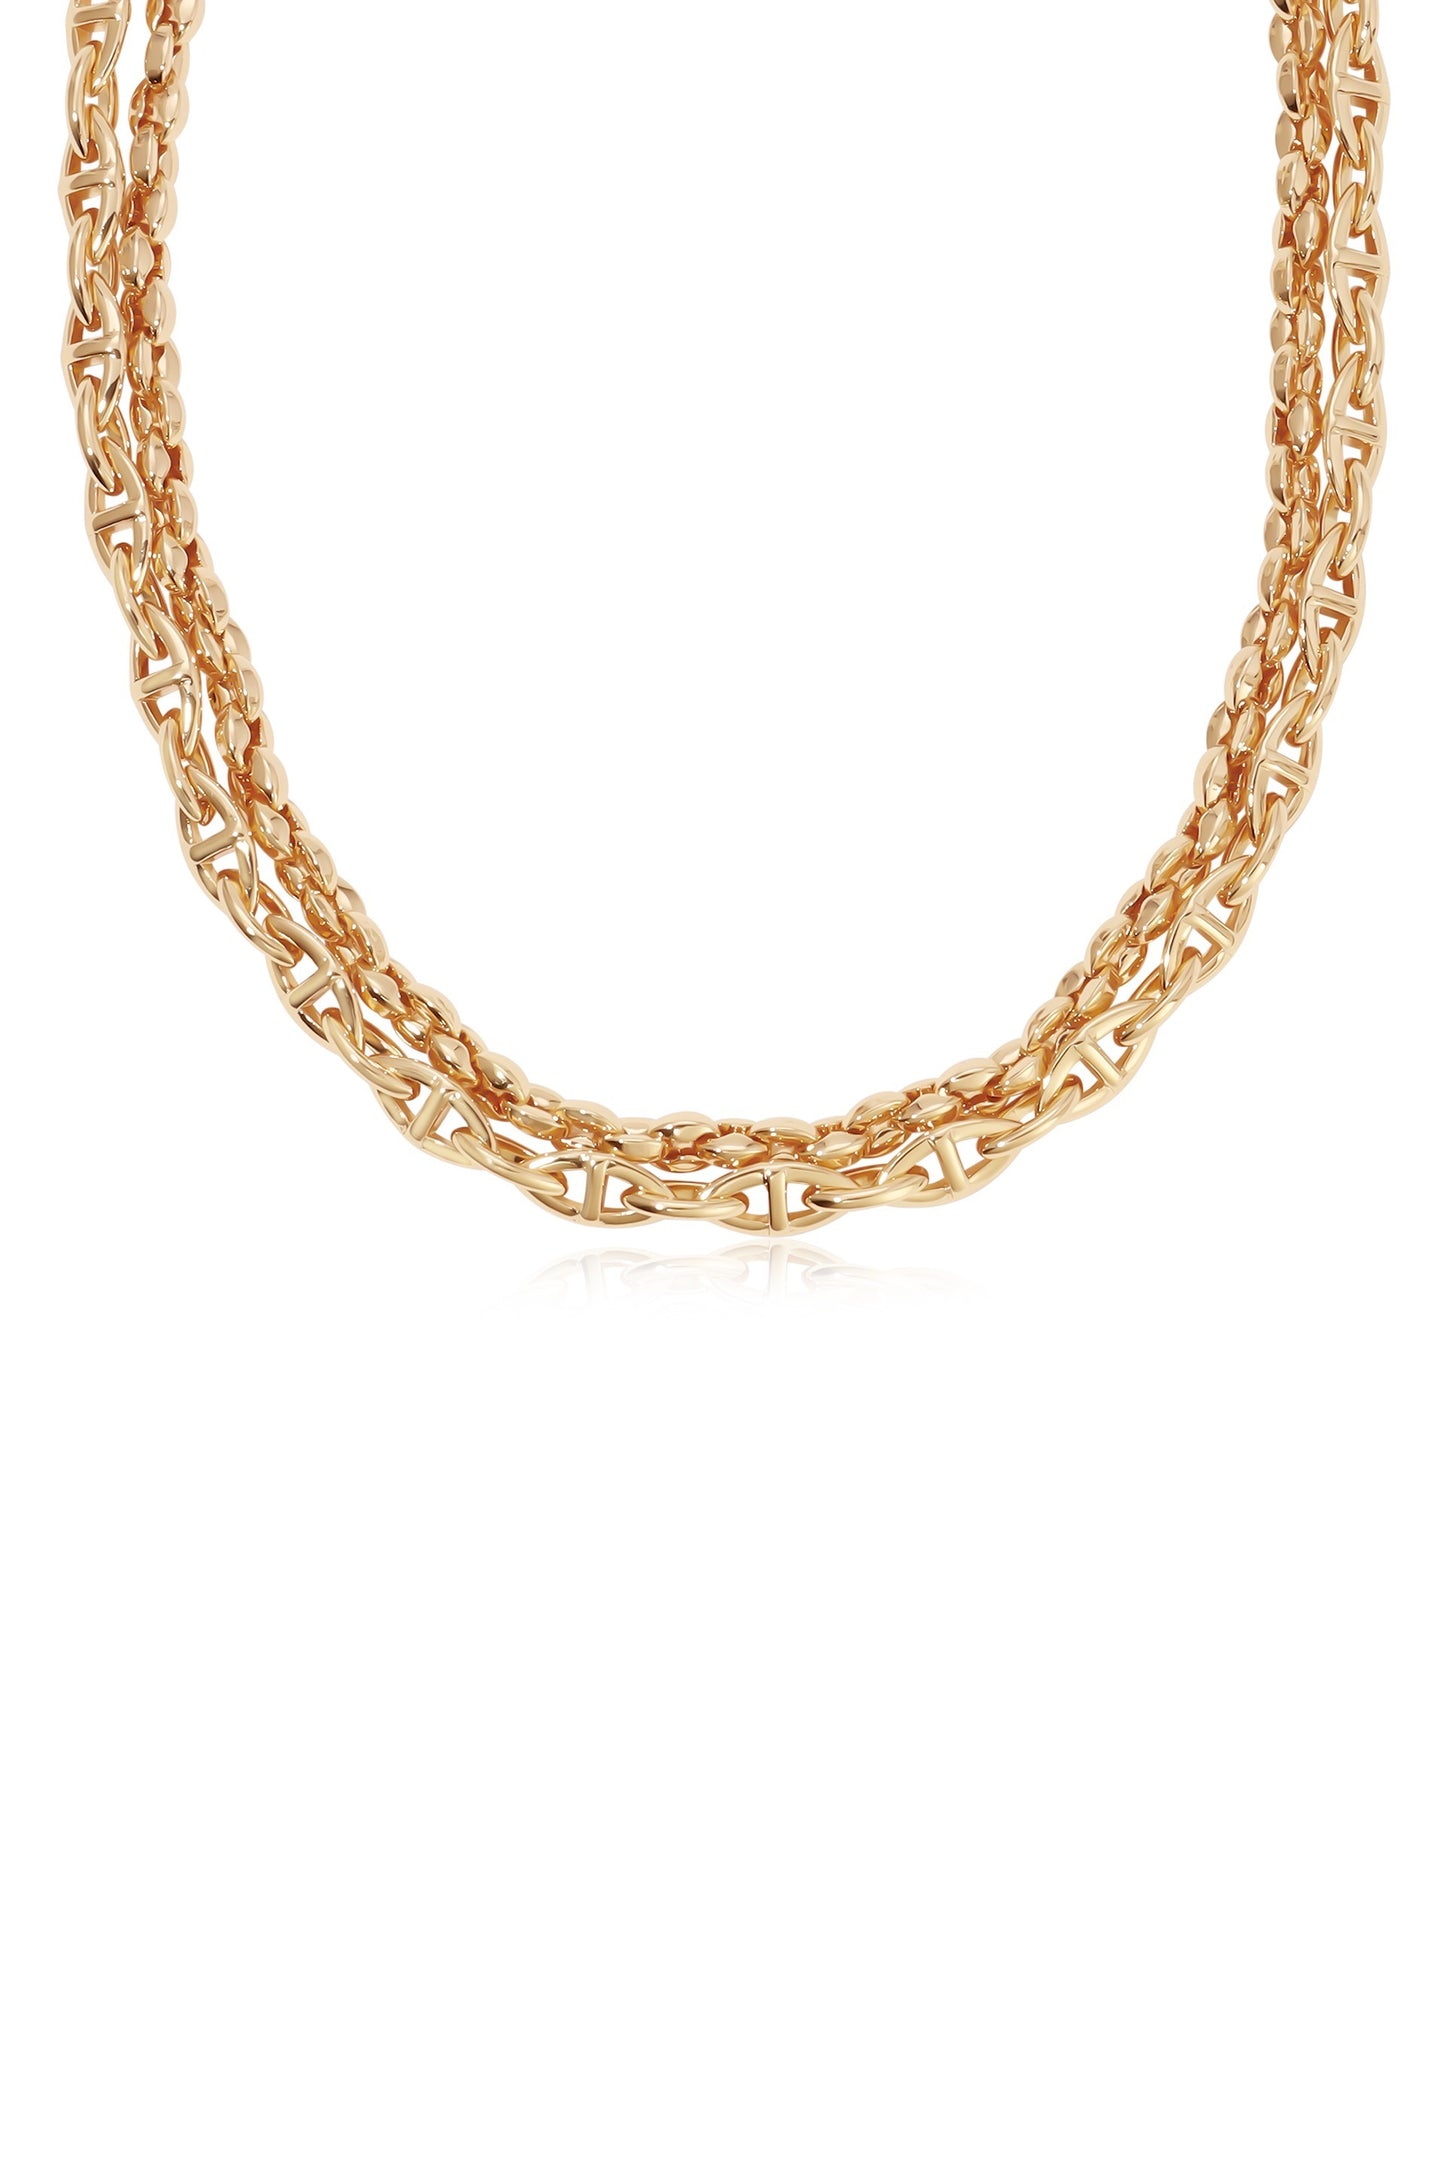 Golden Rays Linked Chain 18k Gold Plated Necklace Set close up